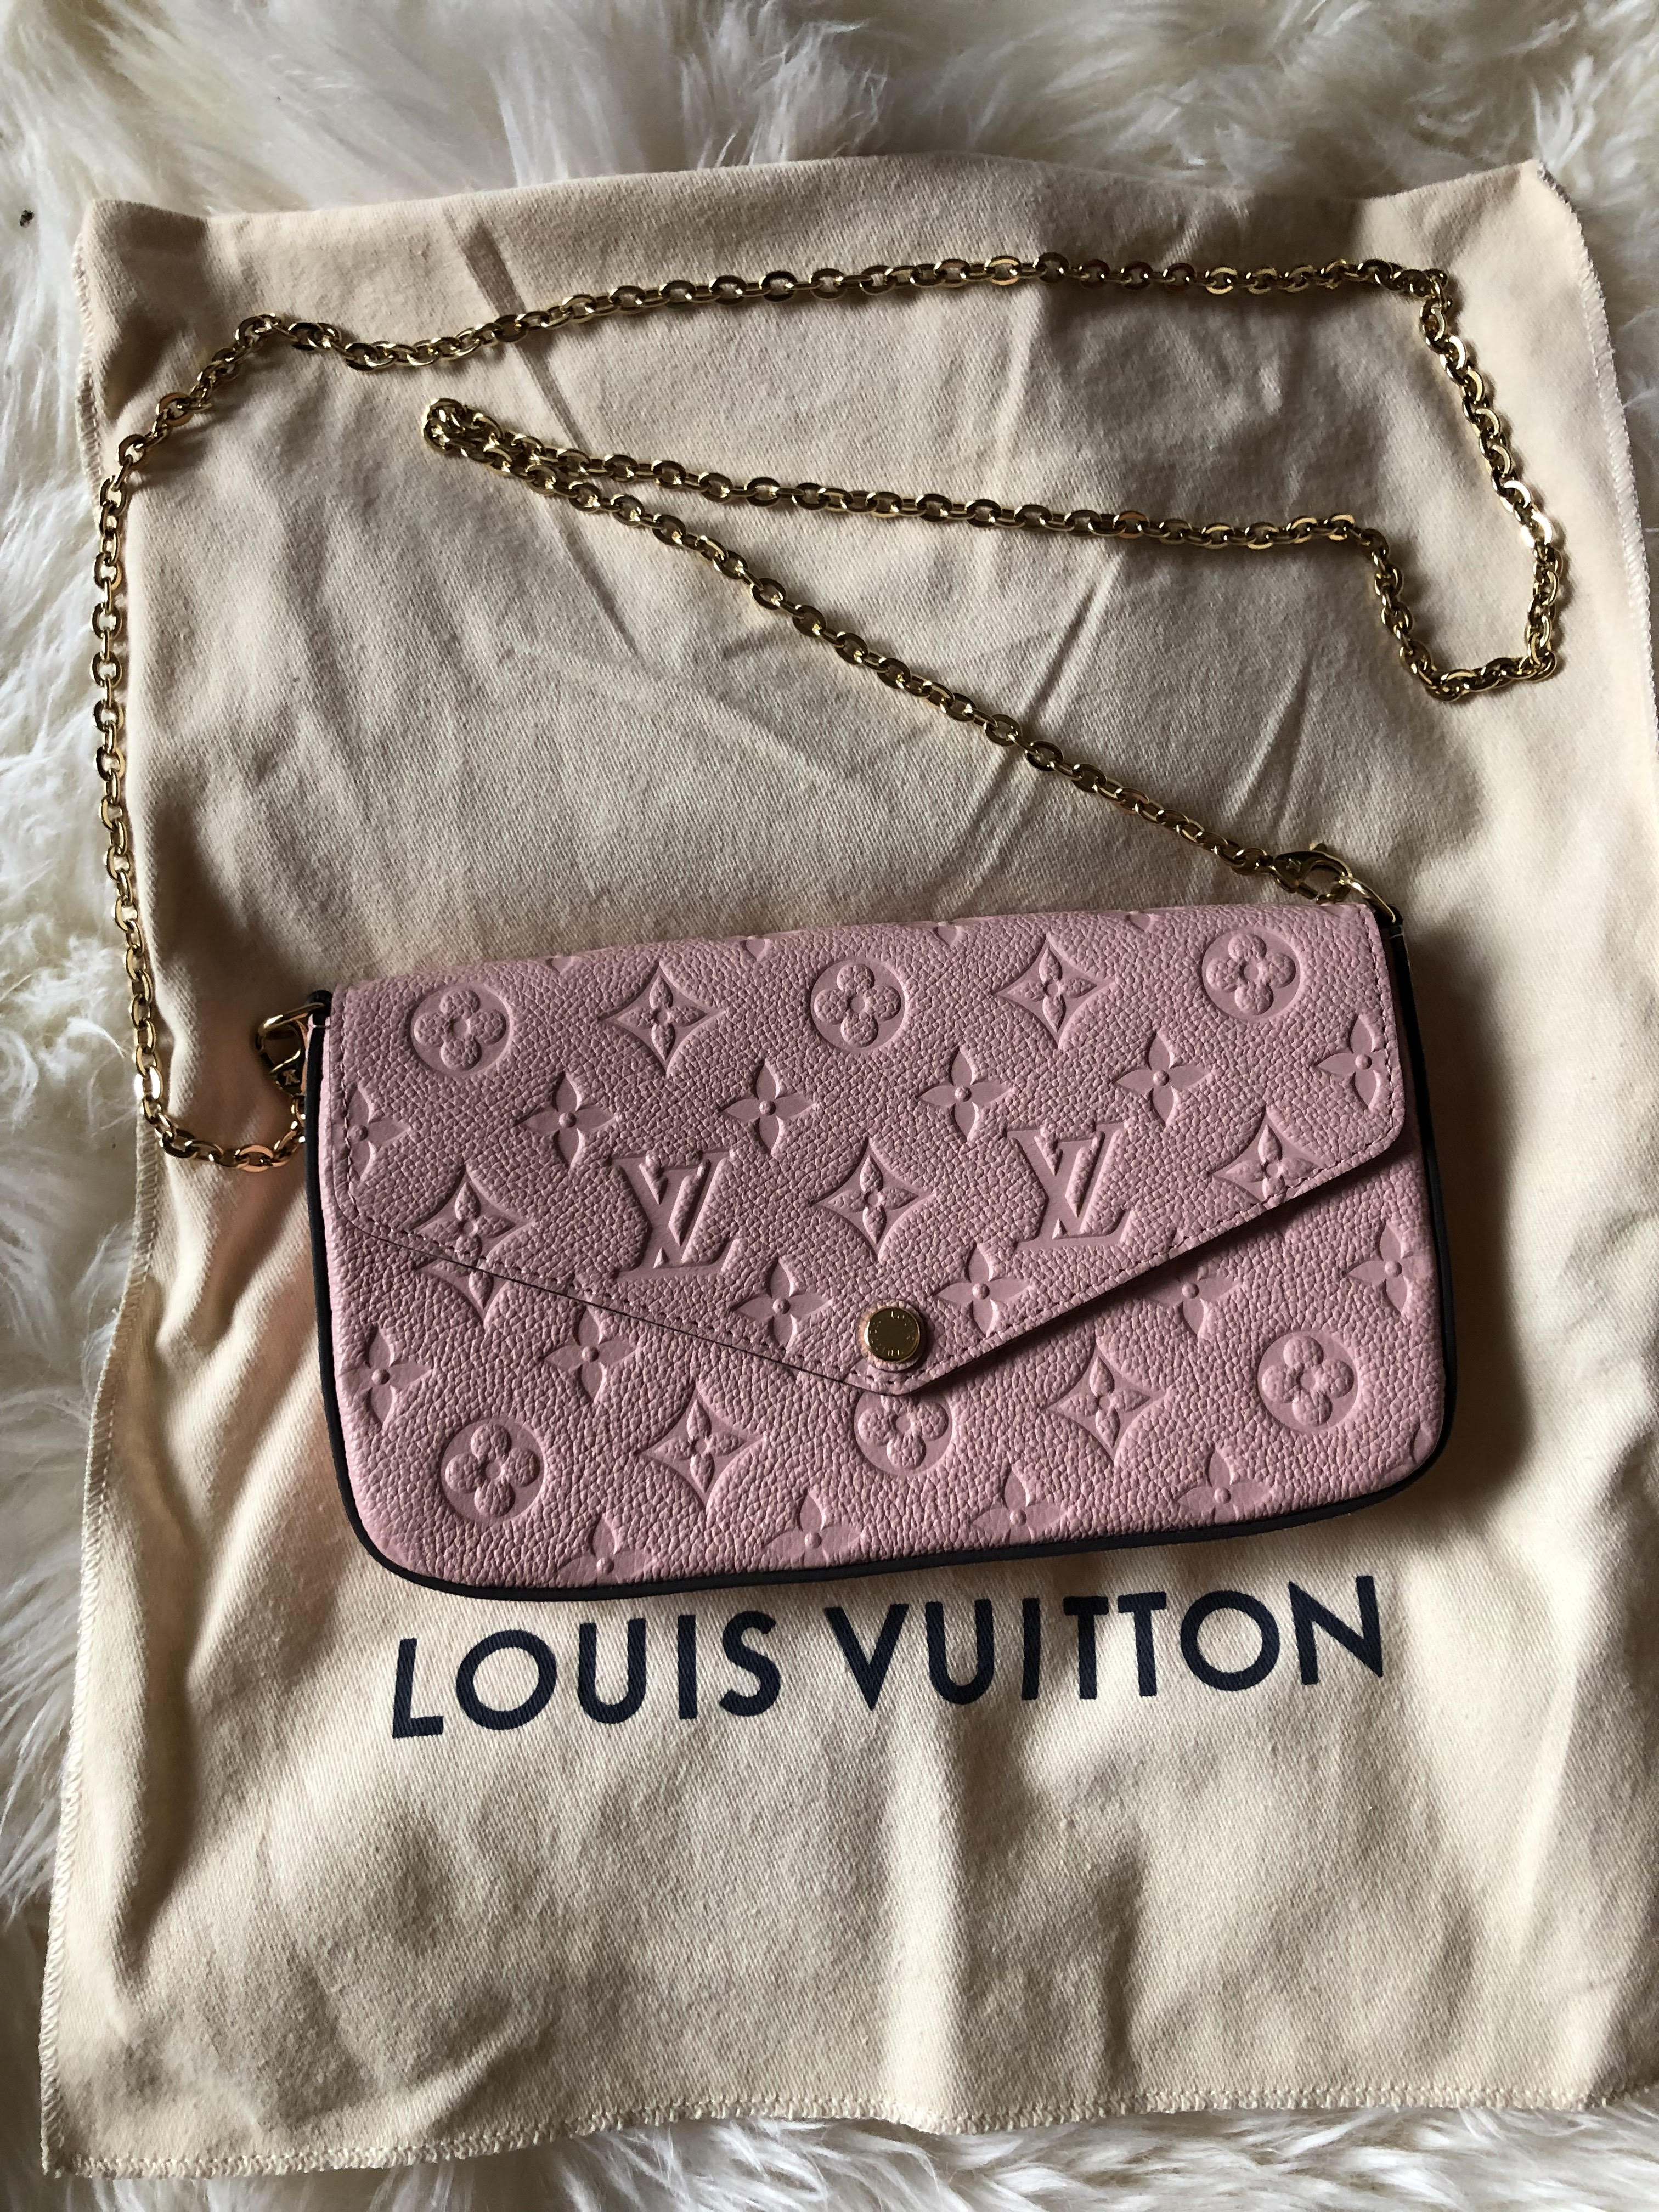 DHgate LV Pochette Felicie Review with Links! 